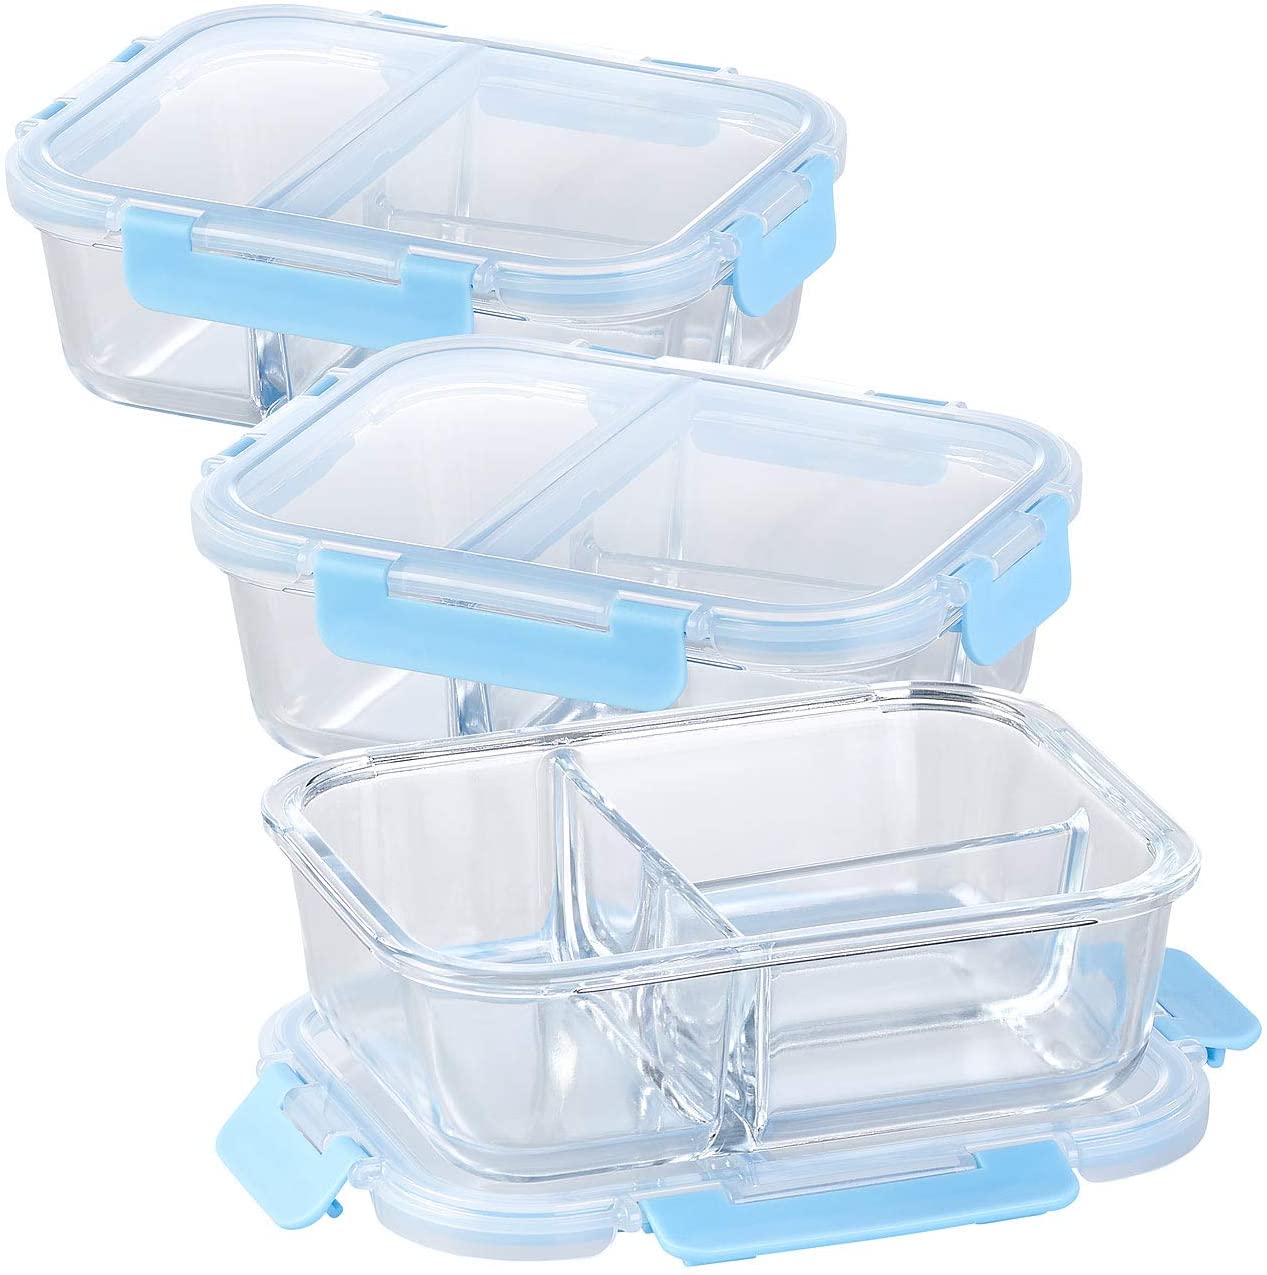 Rosenstein & Söhne Glass Jars: Set of 3 Glass Food Storage Containers with Click Lids and 3 Compartments 1 L (Glass Bowl)